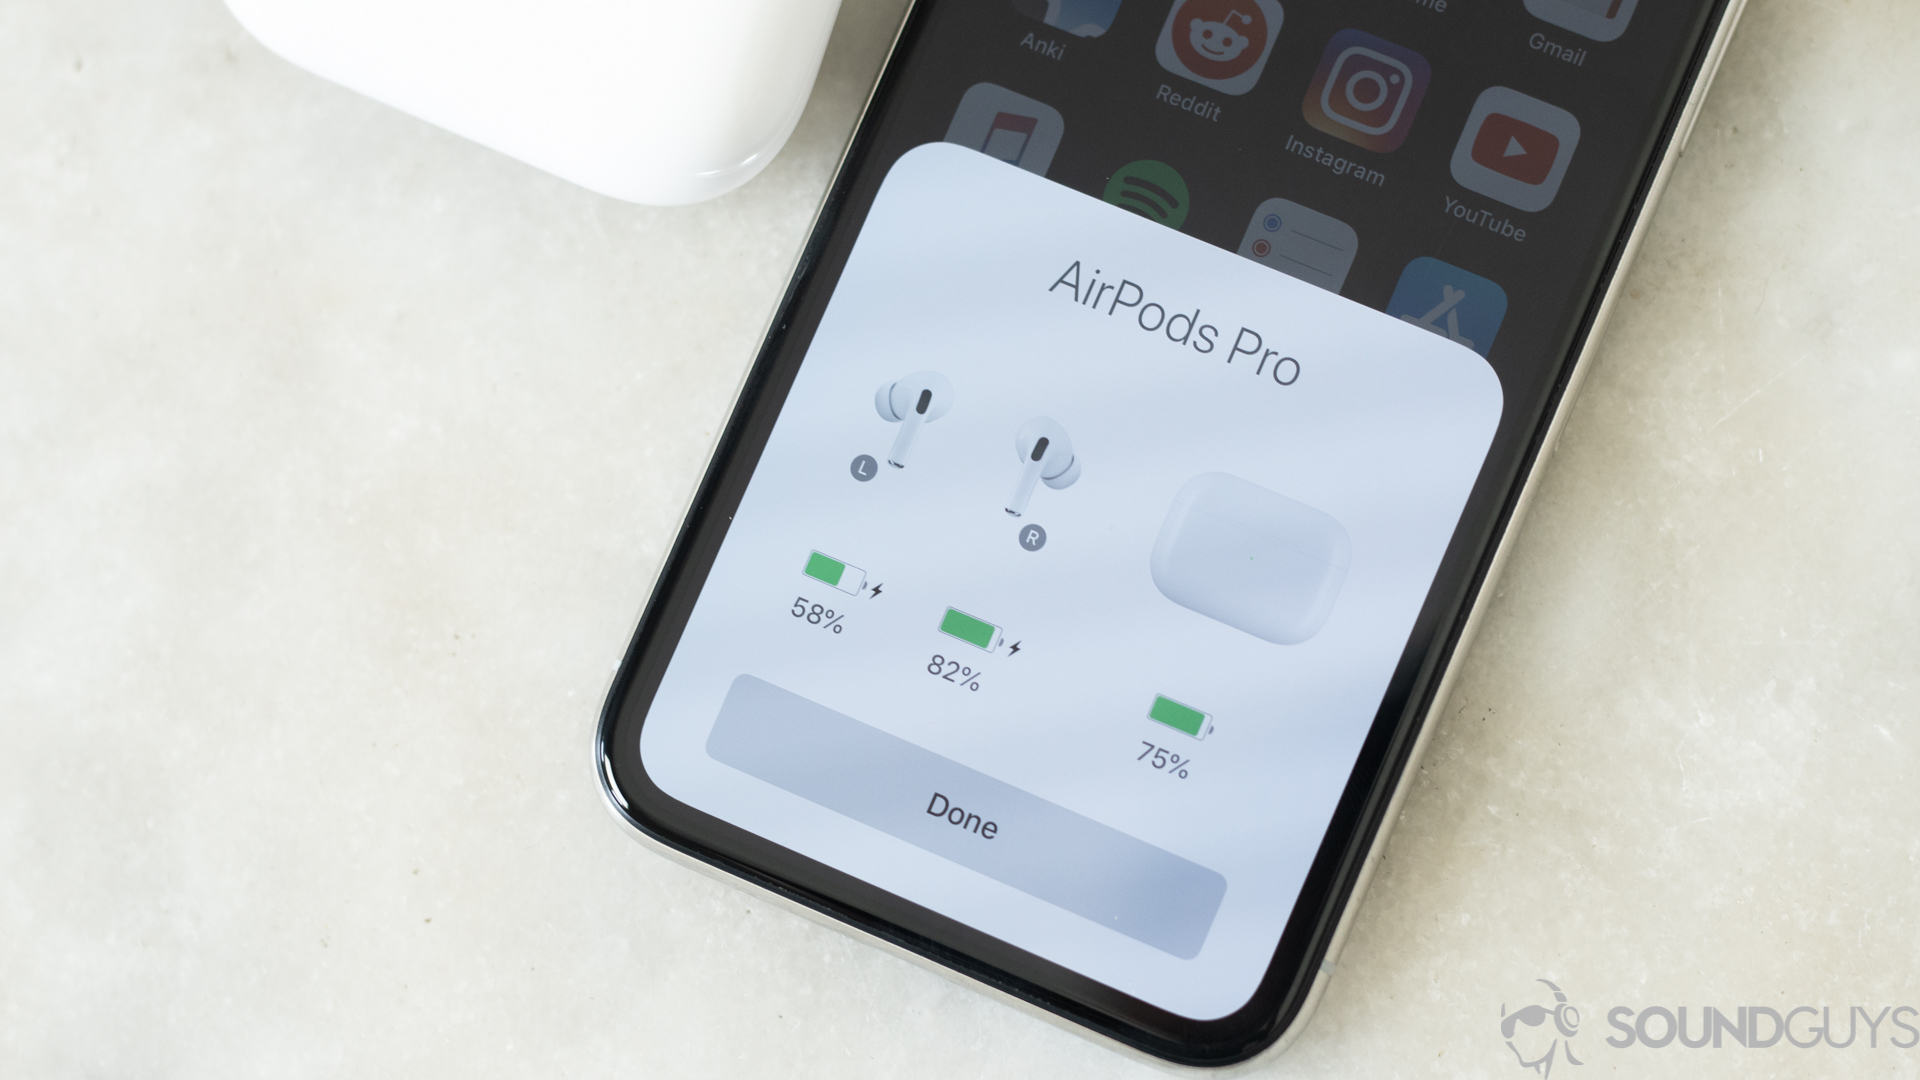 Stay Charged: A Step-by-Step Guide on How to Check AirPod Battery - Step-by-step guide on how to check AirPod battery through iPhone settings